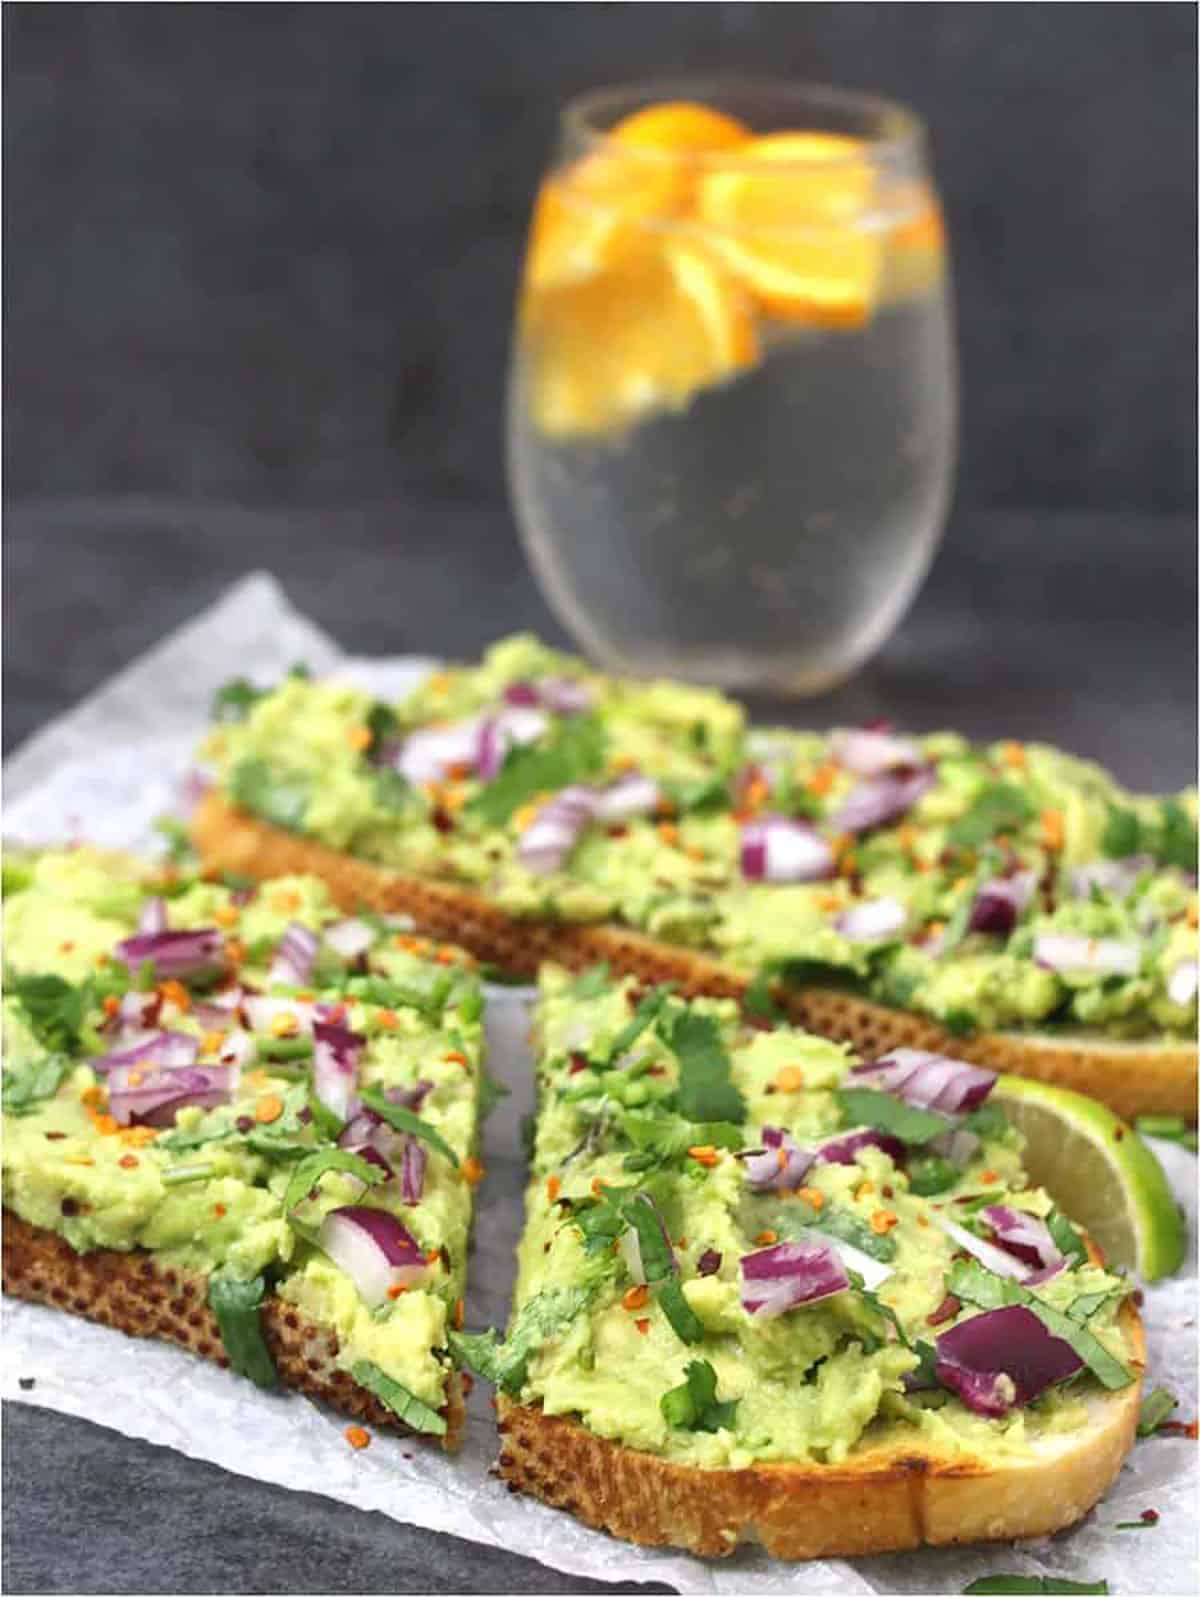 Healthy breakfast toast with mashed avocados, and interesting topping ideas. Sparkling water with orange wedges in the background.